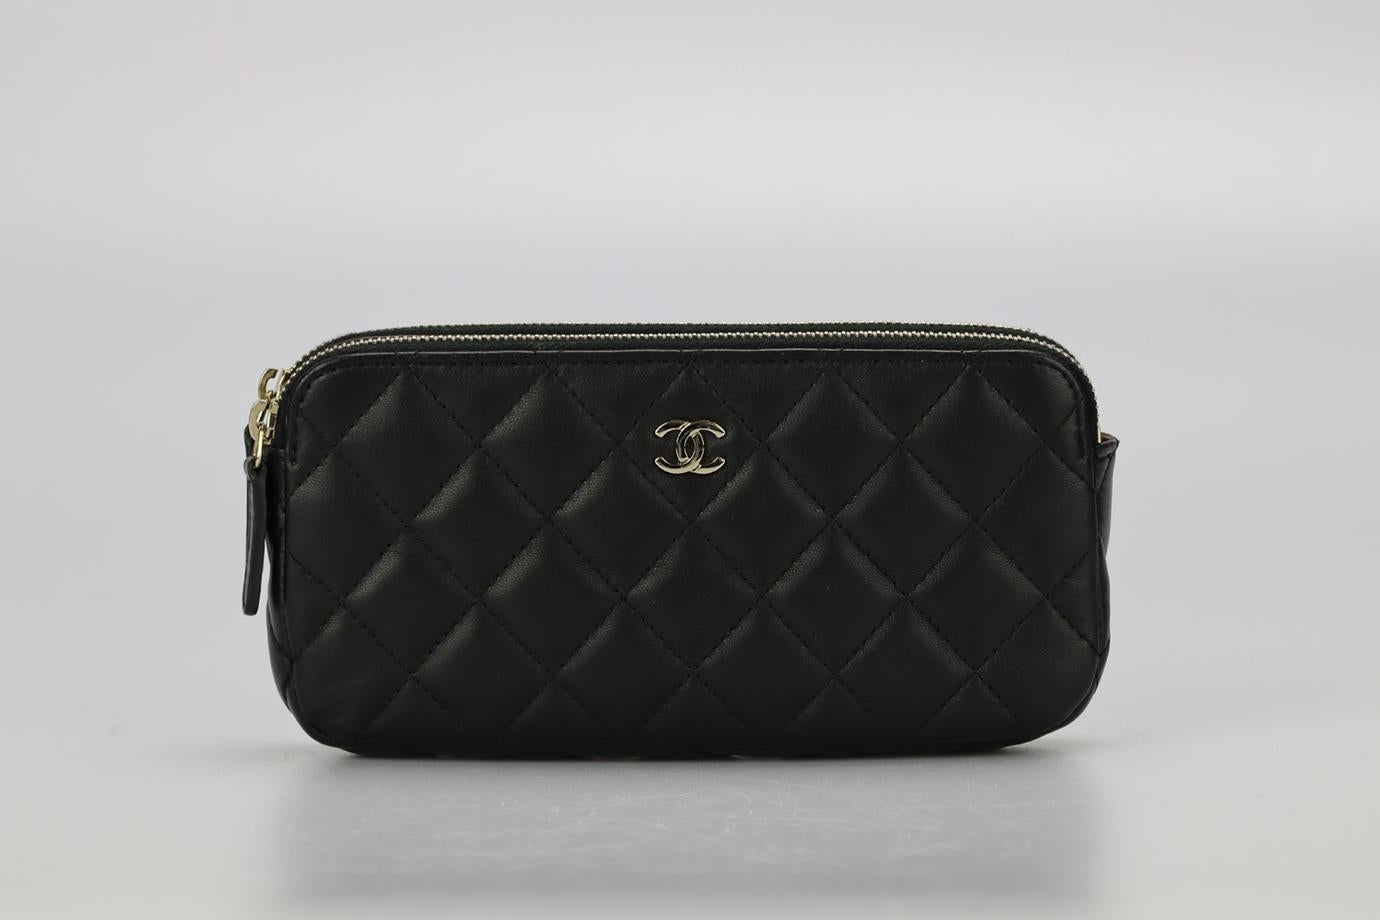 Chanel 2016 Clutch With Chain Quilted Leather Shoulder Bag. Black. Zip fastening - Top. Comes with - authenticity card. Does not come with - dustbag or box. Height: 3.2 in. Width: 7.2 in. Depth: 1.2 in. Strap drop: 23.2 in. Condition: Used. Very